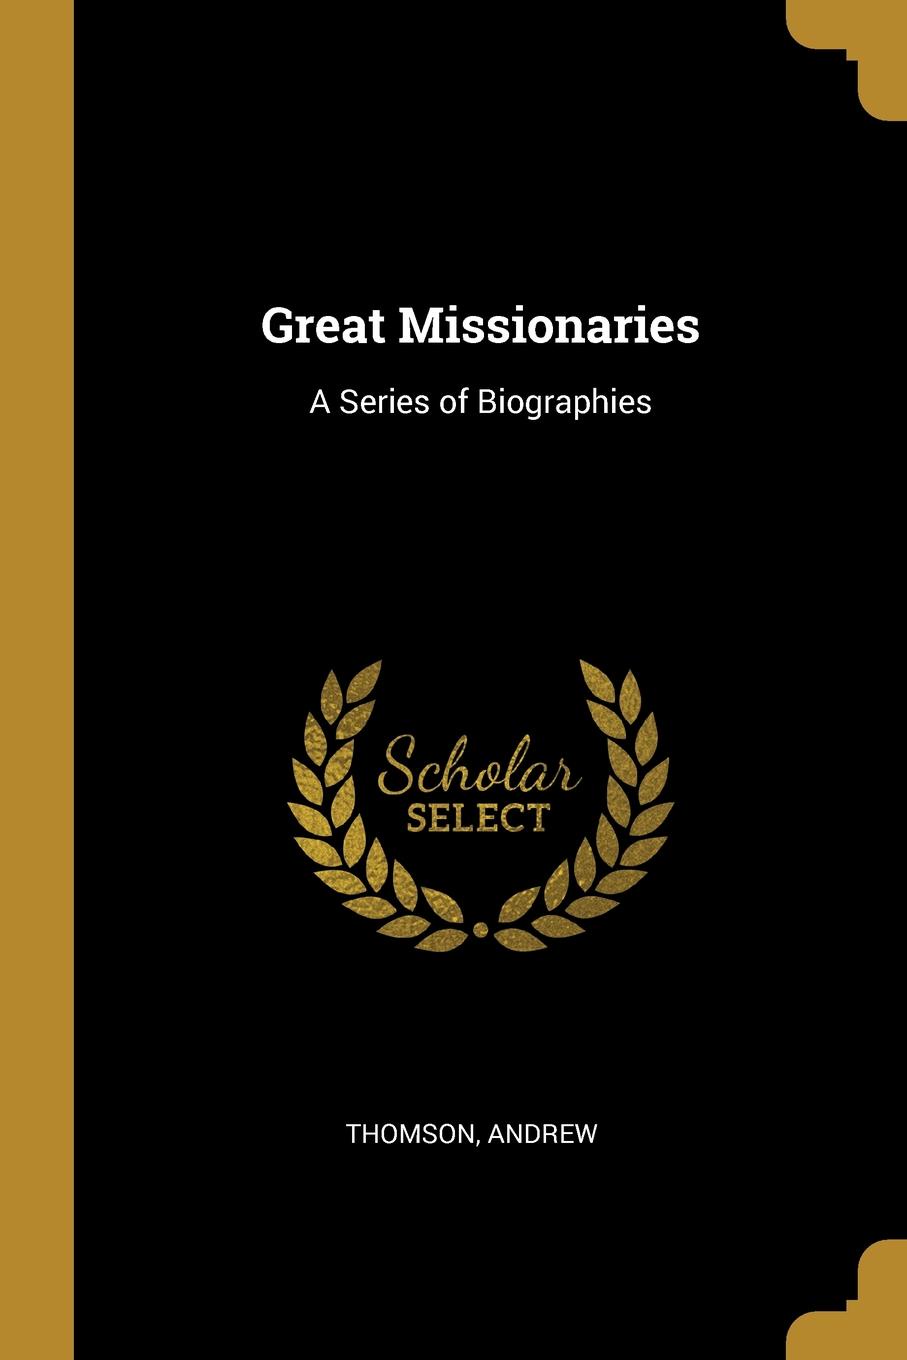 Great Missionaries. A Series of Biographies